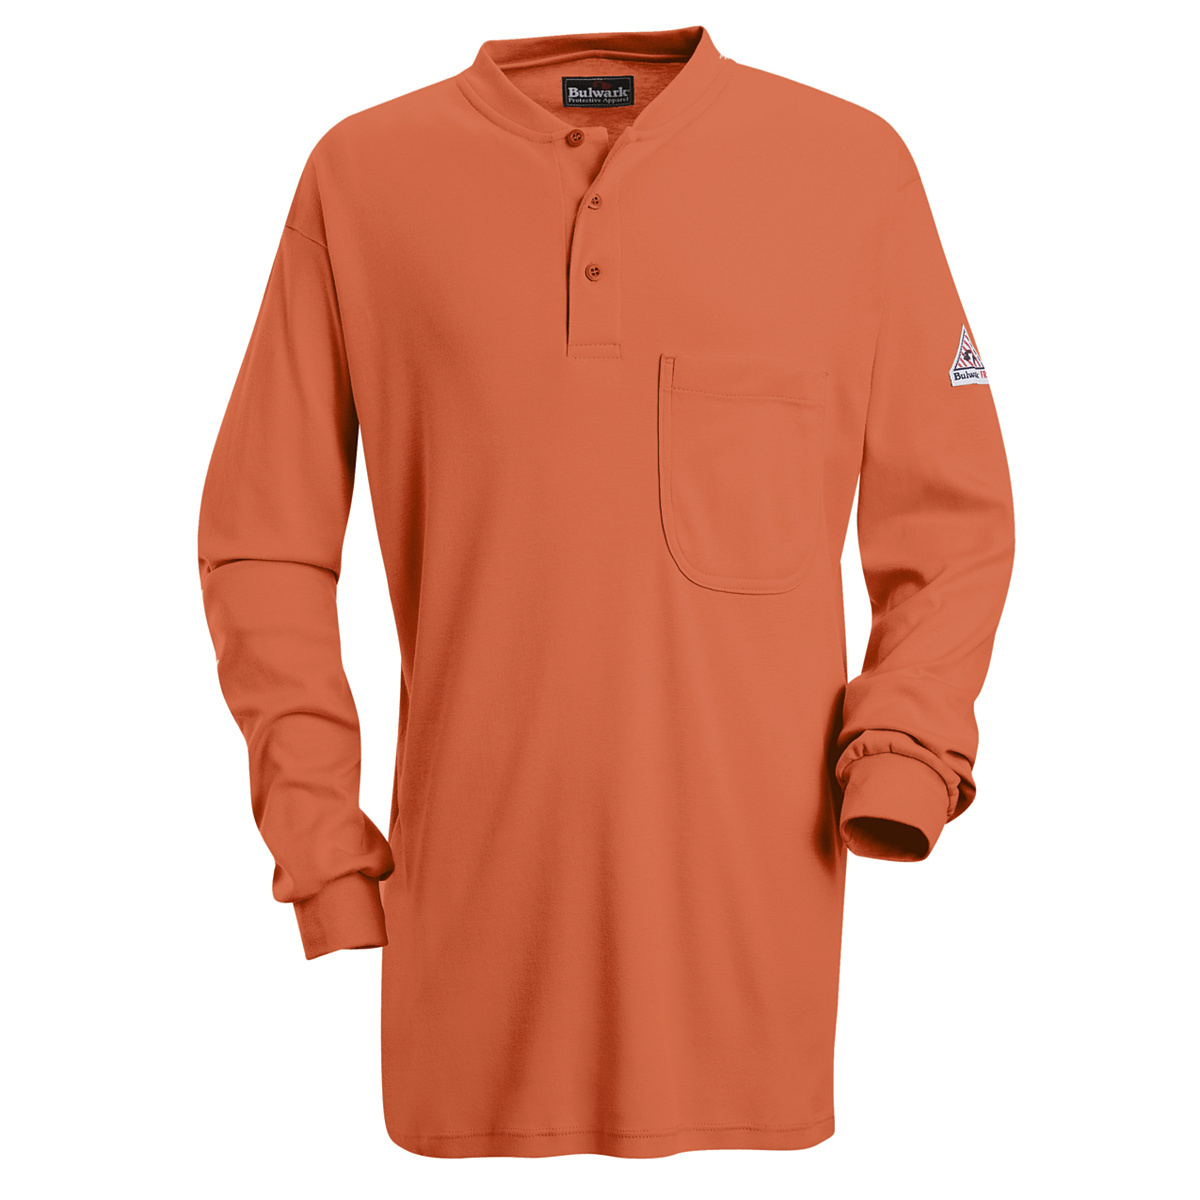 Bulwark® 2X Tall Orange EXCEL FR® Interlock FR Cotton Flame Resistant Henley Shirt With Button Front Closure